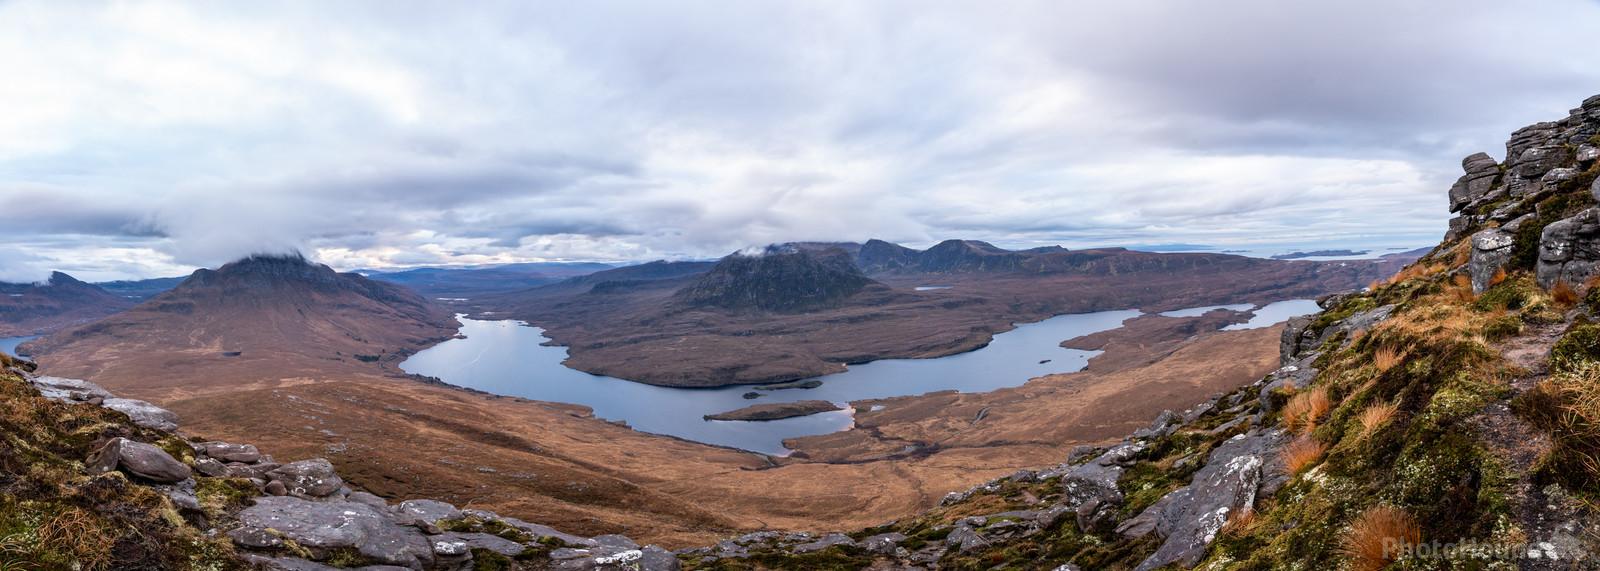 Image of Stac Pollaidh by Richard Lizzimore